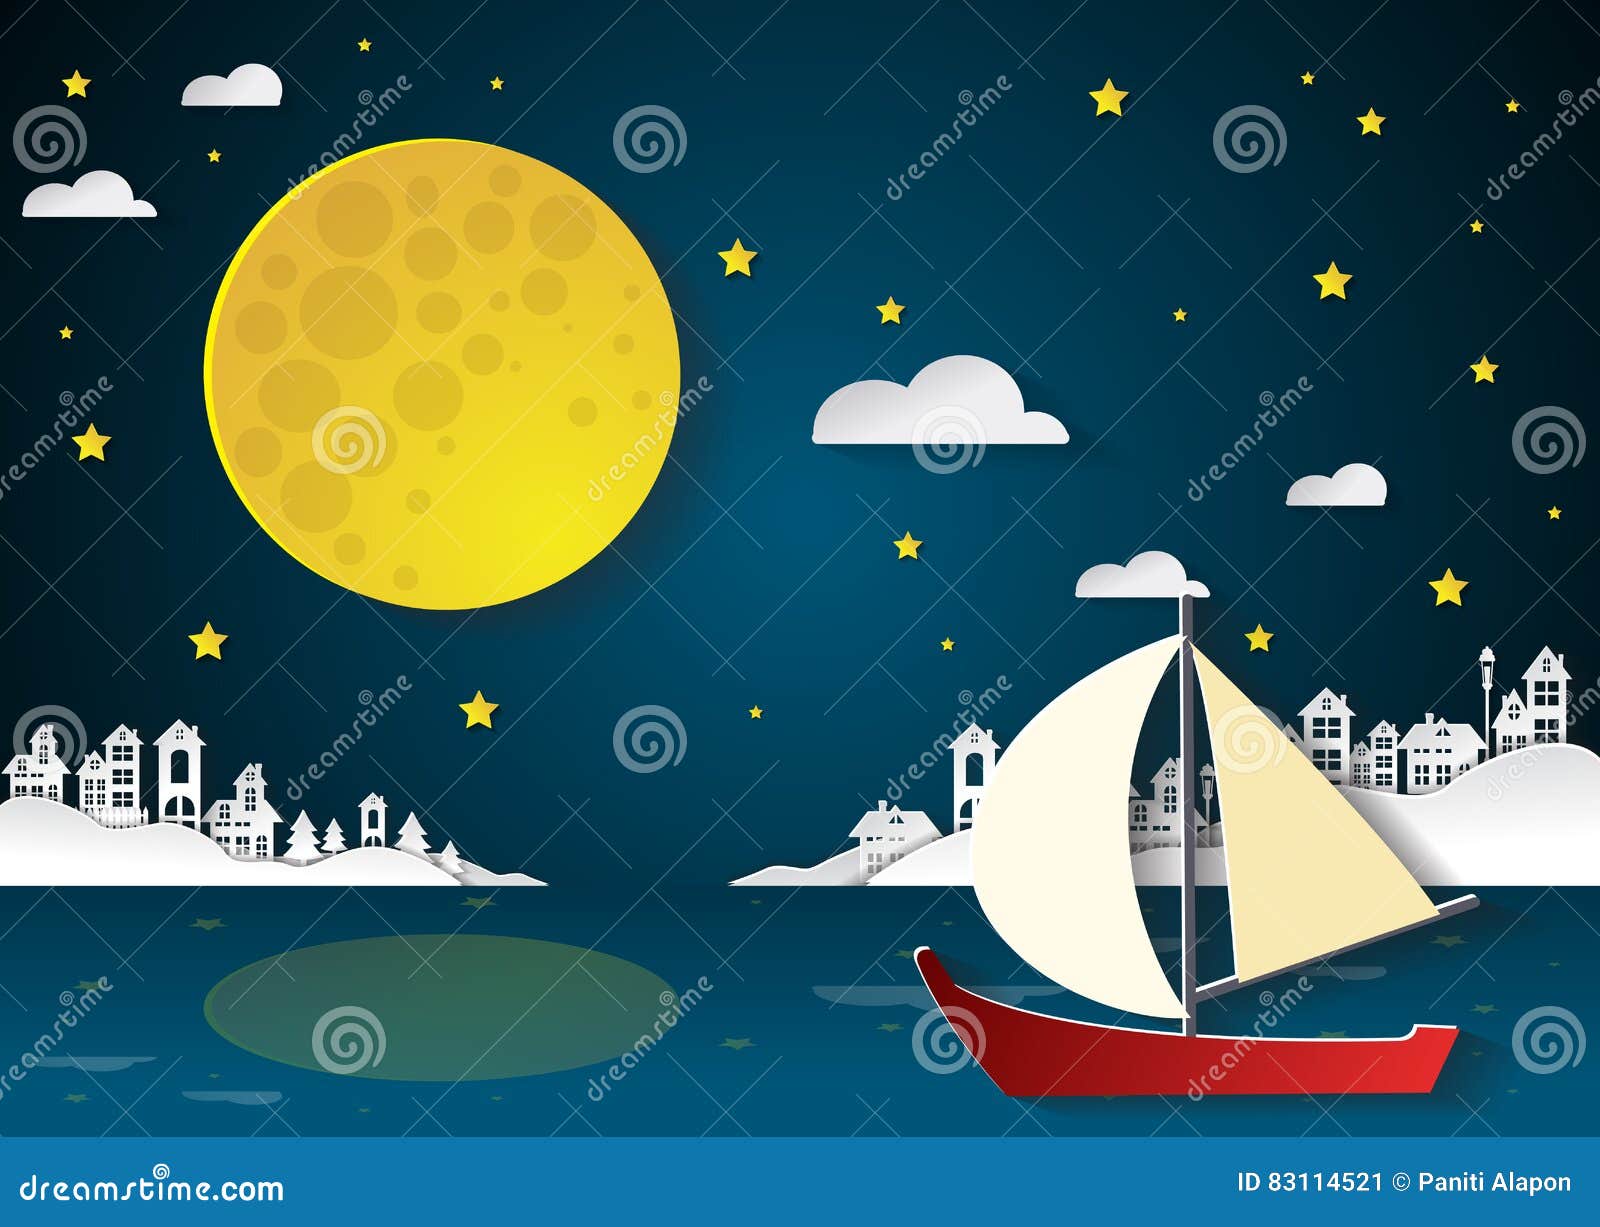 sailing boat at nighttime with full moon and cityscapes.paper cu